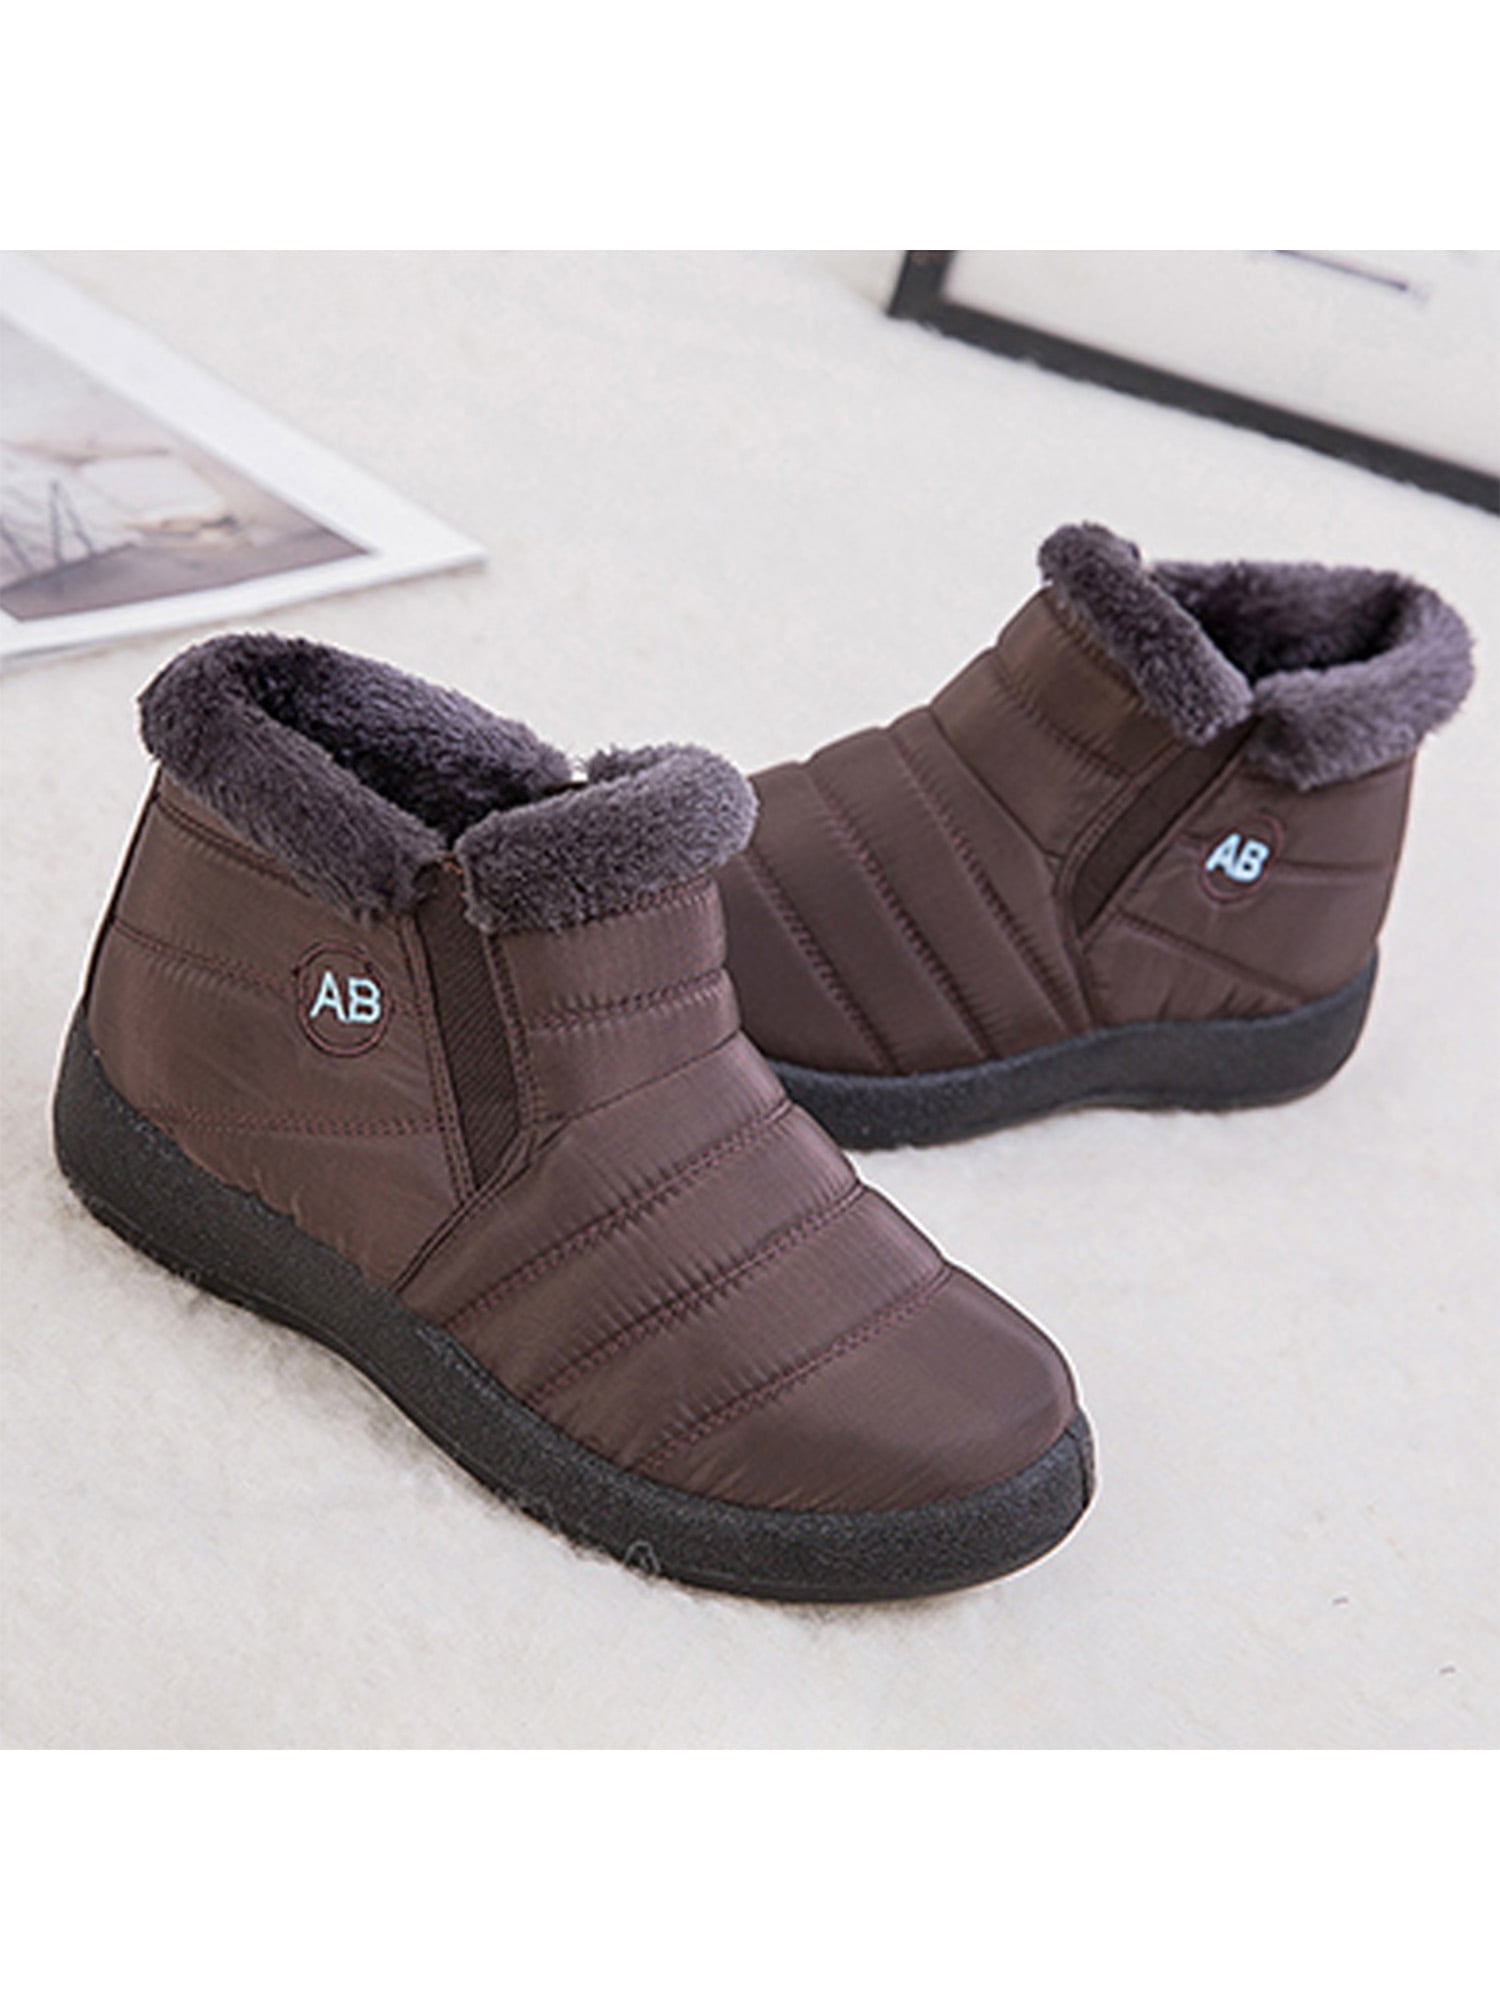 Women Winter Snow Boots Outdoor Ankle Bootie Water-Resistant Fur Lined Warm Shoes